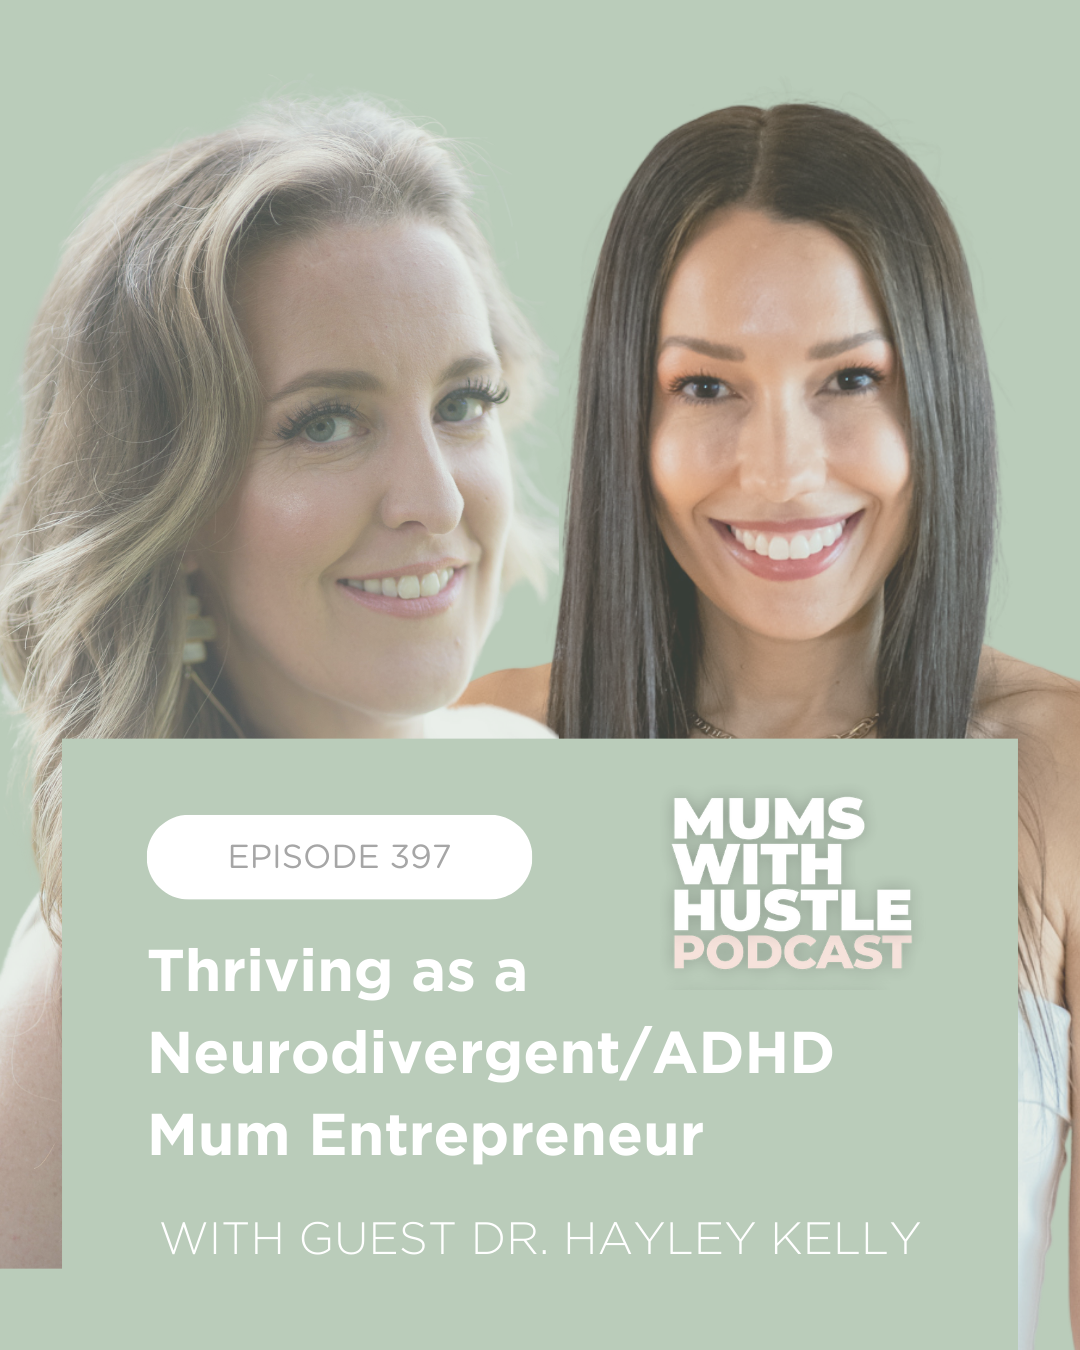 MWH 397 : Thriving as a Neurodivergent/ADHD Mum Entrepreneur with Dr. Hayley Kelly